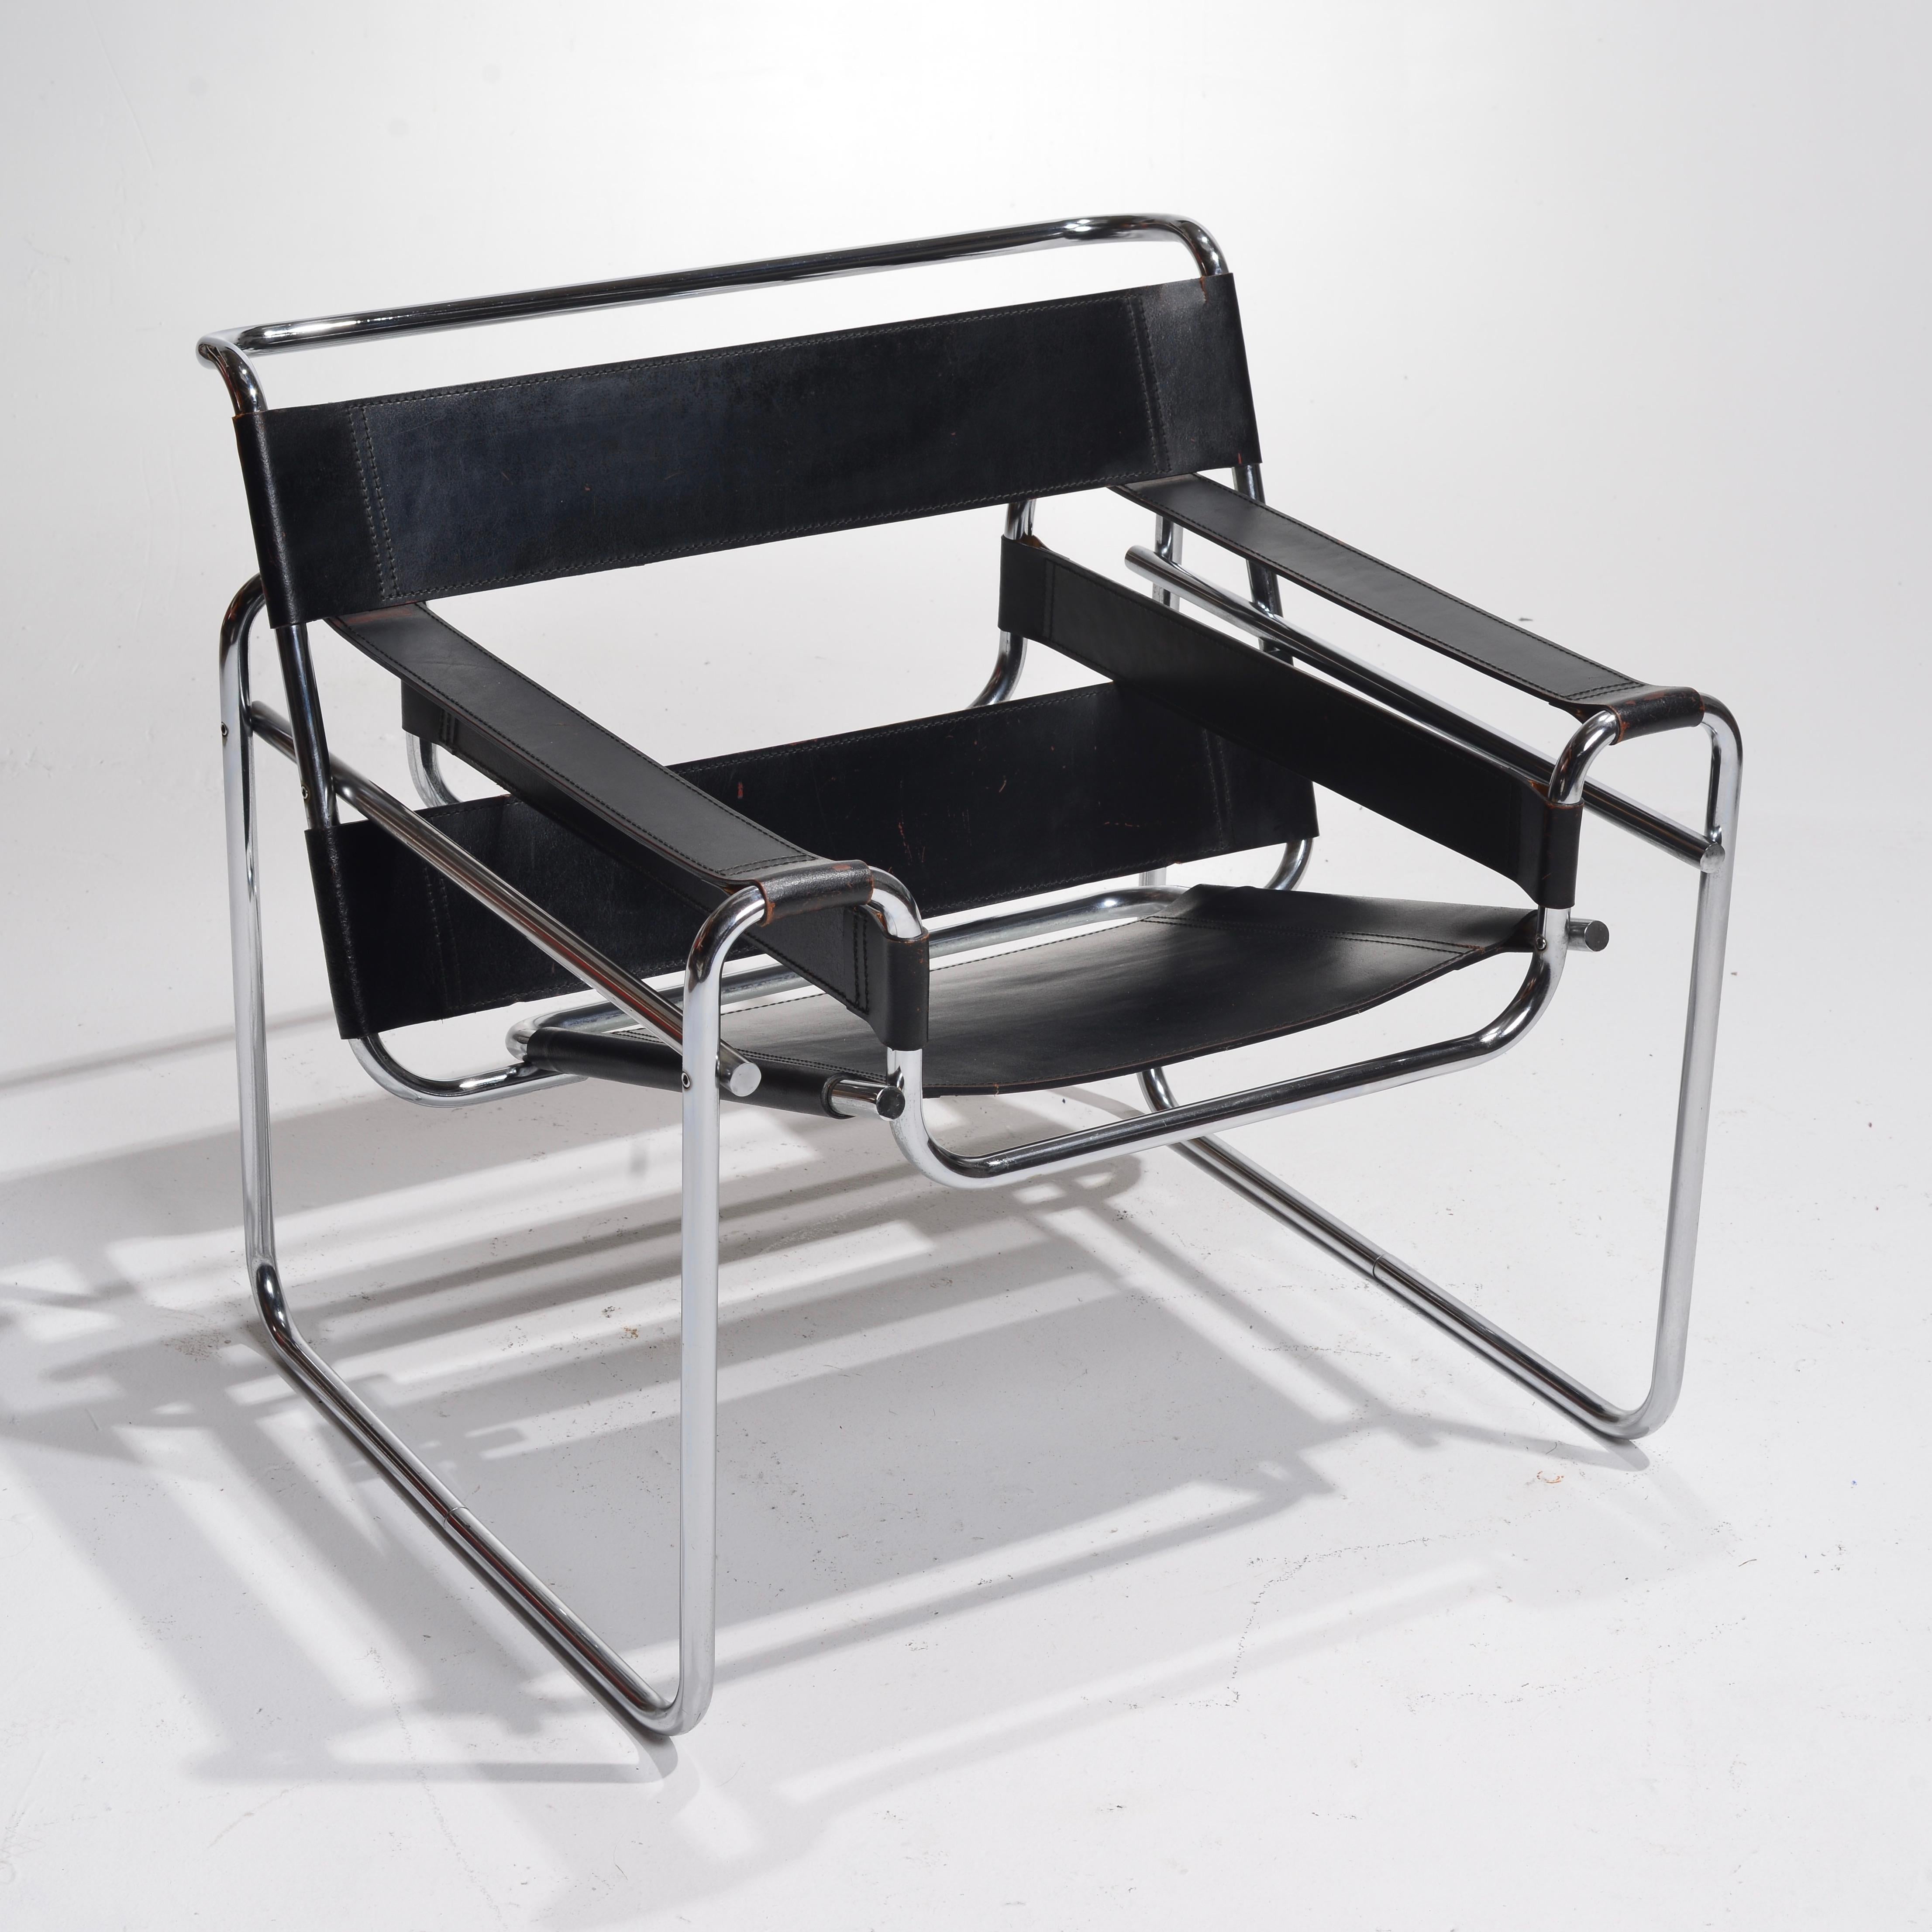 ntroducing the Knoll Wassily B3 Armchair by Marcel Breuer for Gavina - A Modern Classic from 1960

The Knoll Wassily B3 Armchair, designed by the visionary Marcel Breuer for Gavina in 1960, is an iconic piece of furniture that exemplifies the